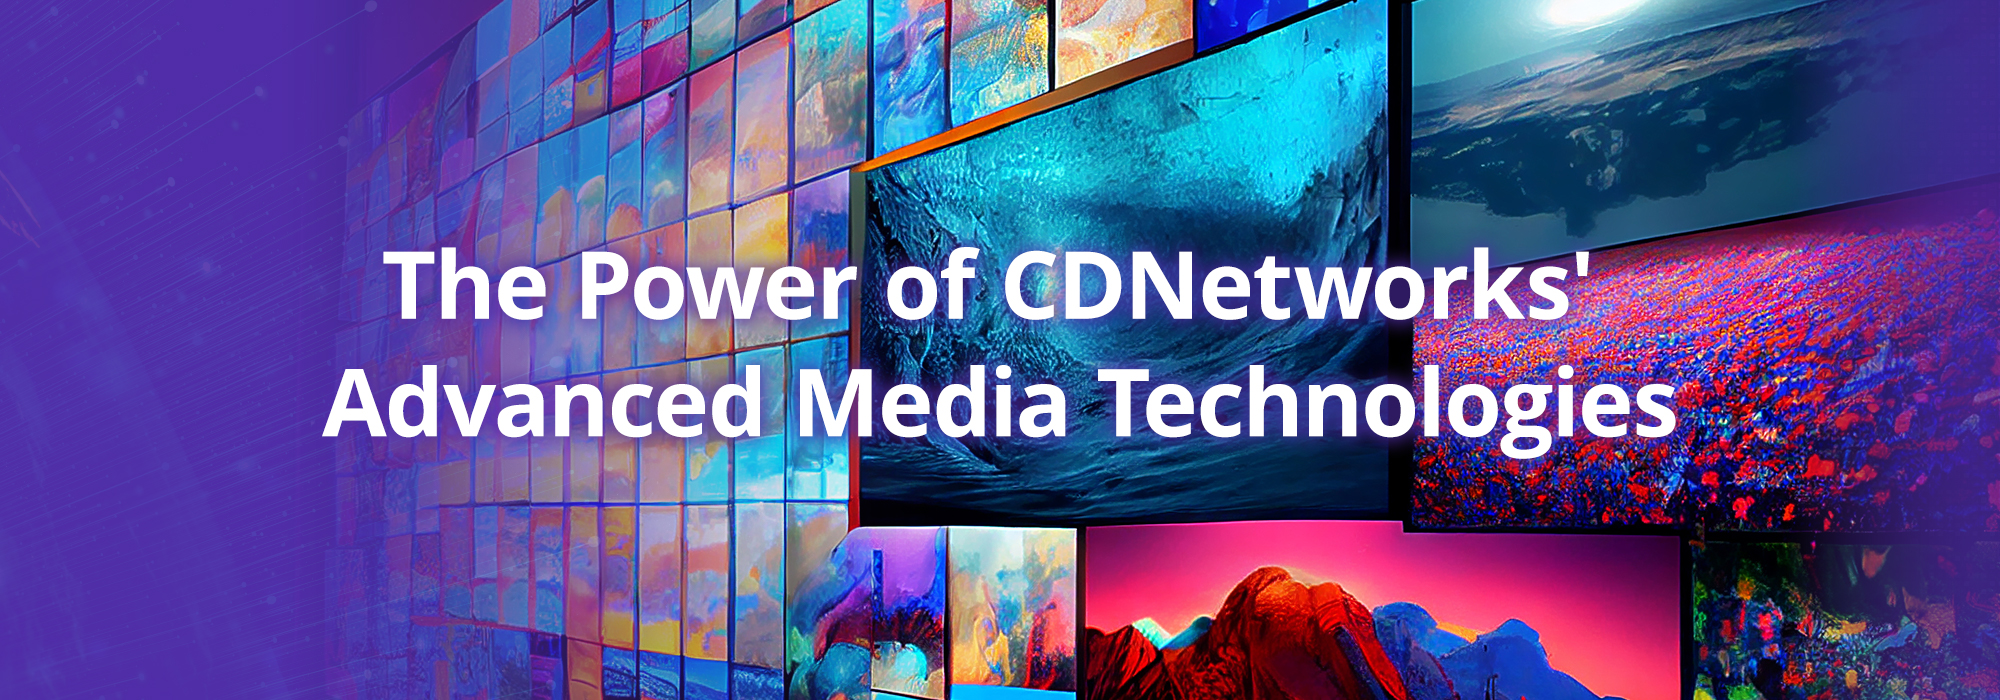 Maximizing Viewer Experiences and Savings - The Power of Advanced Media Technologies - CDNetworks